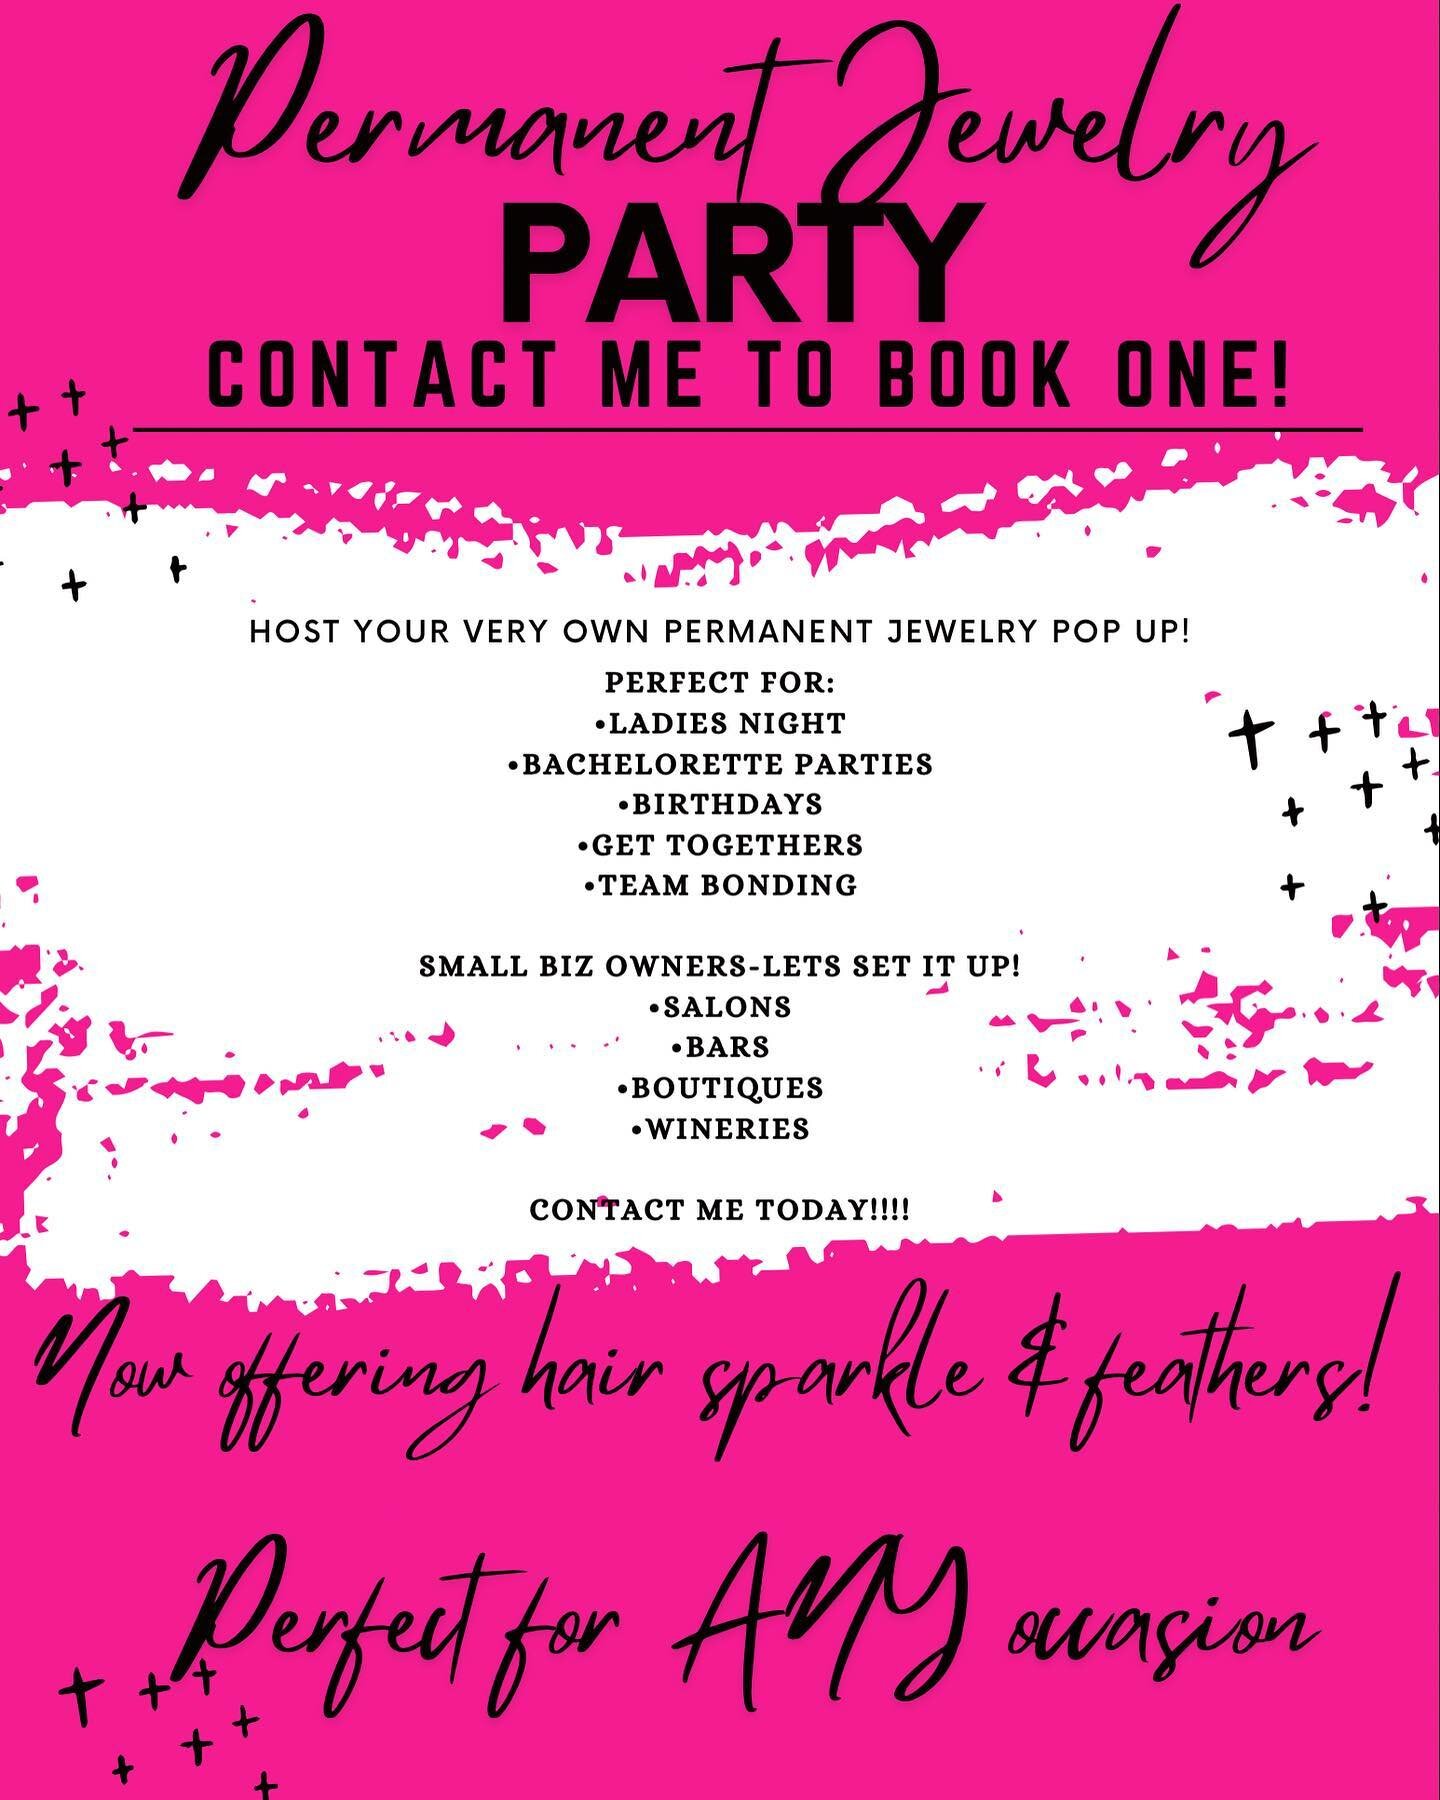 Want to host your own PERMANENT JEWELRY PARTY??? Send me a DM and let&rsquo;s set it up! I now offer hair sparkle &amp; feathers too!!!!! Perfect for graduation parties-showers-ANY type of event!!!
&bull;
&bull;
&bull;
&bull;
#jericiandco #permanentj